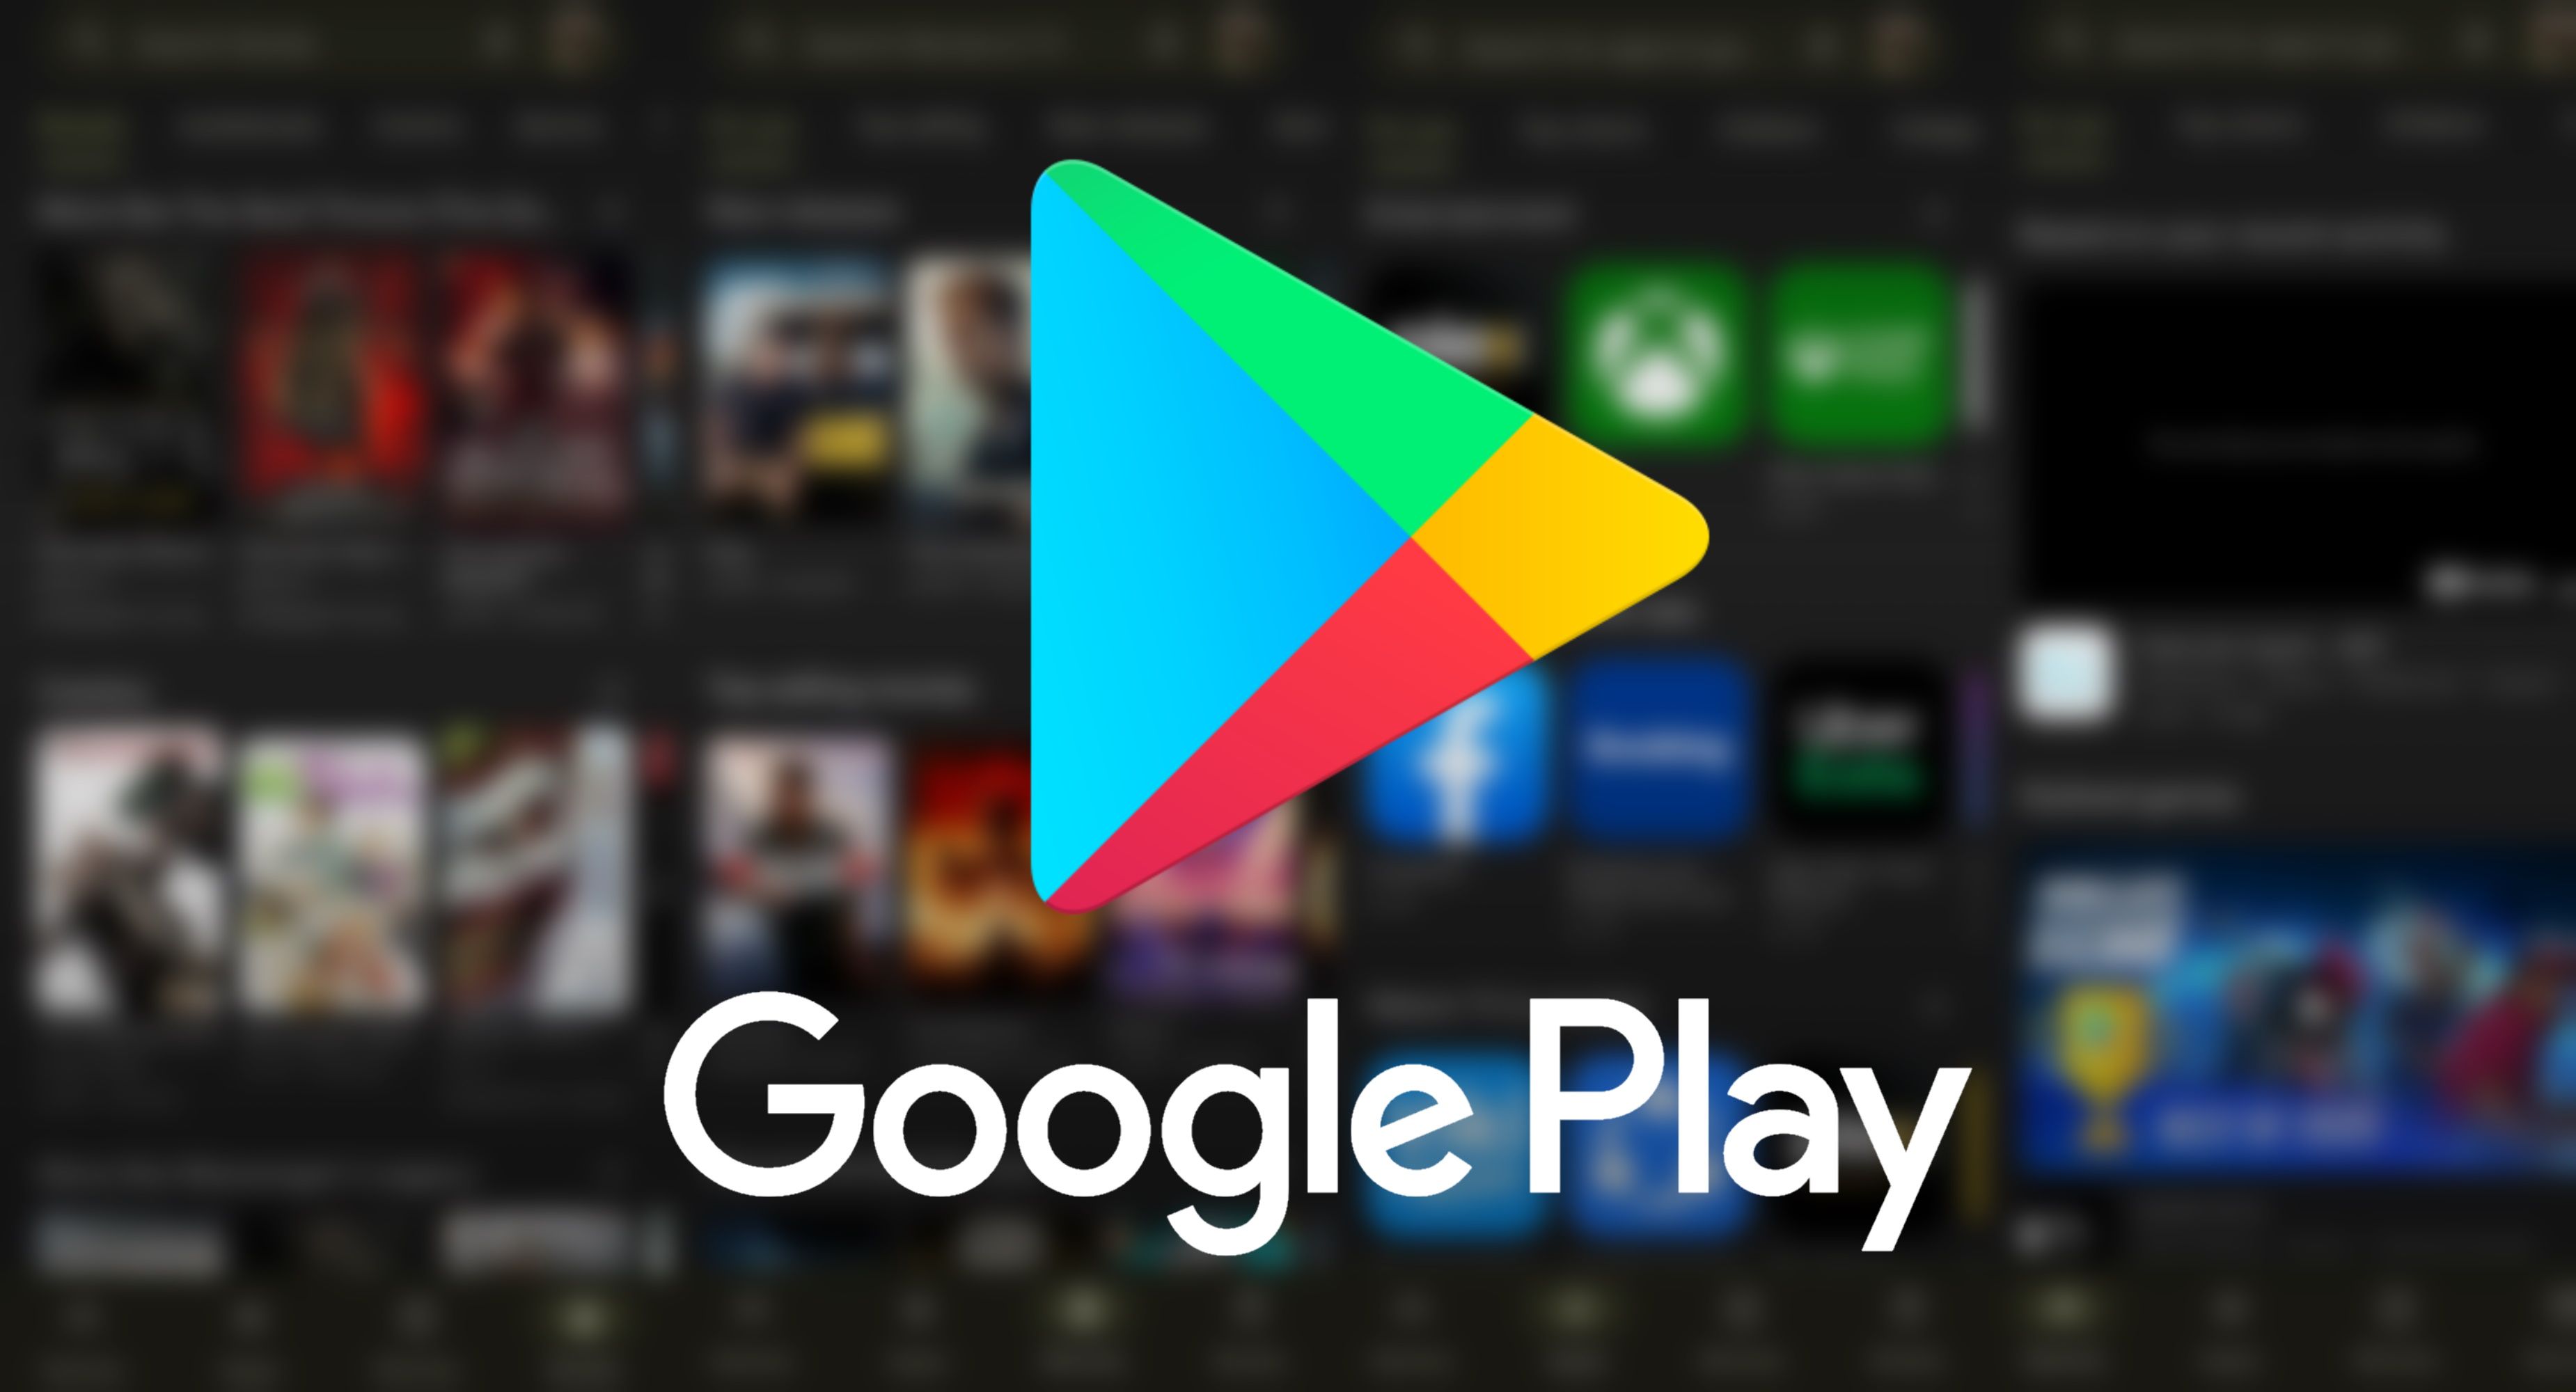 How can users access Google Play on their devices?
